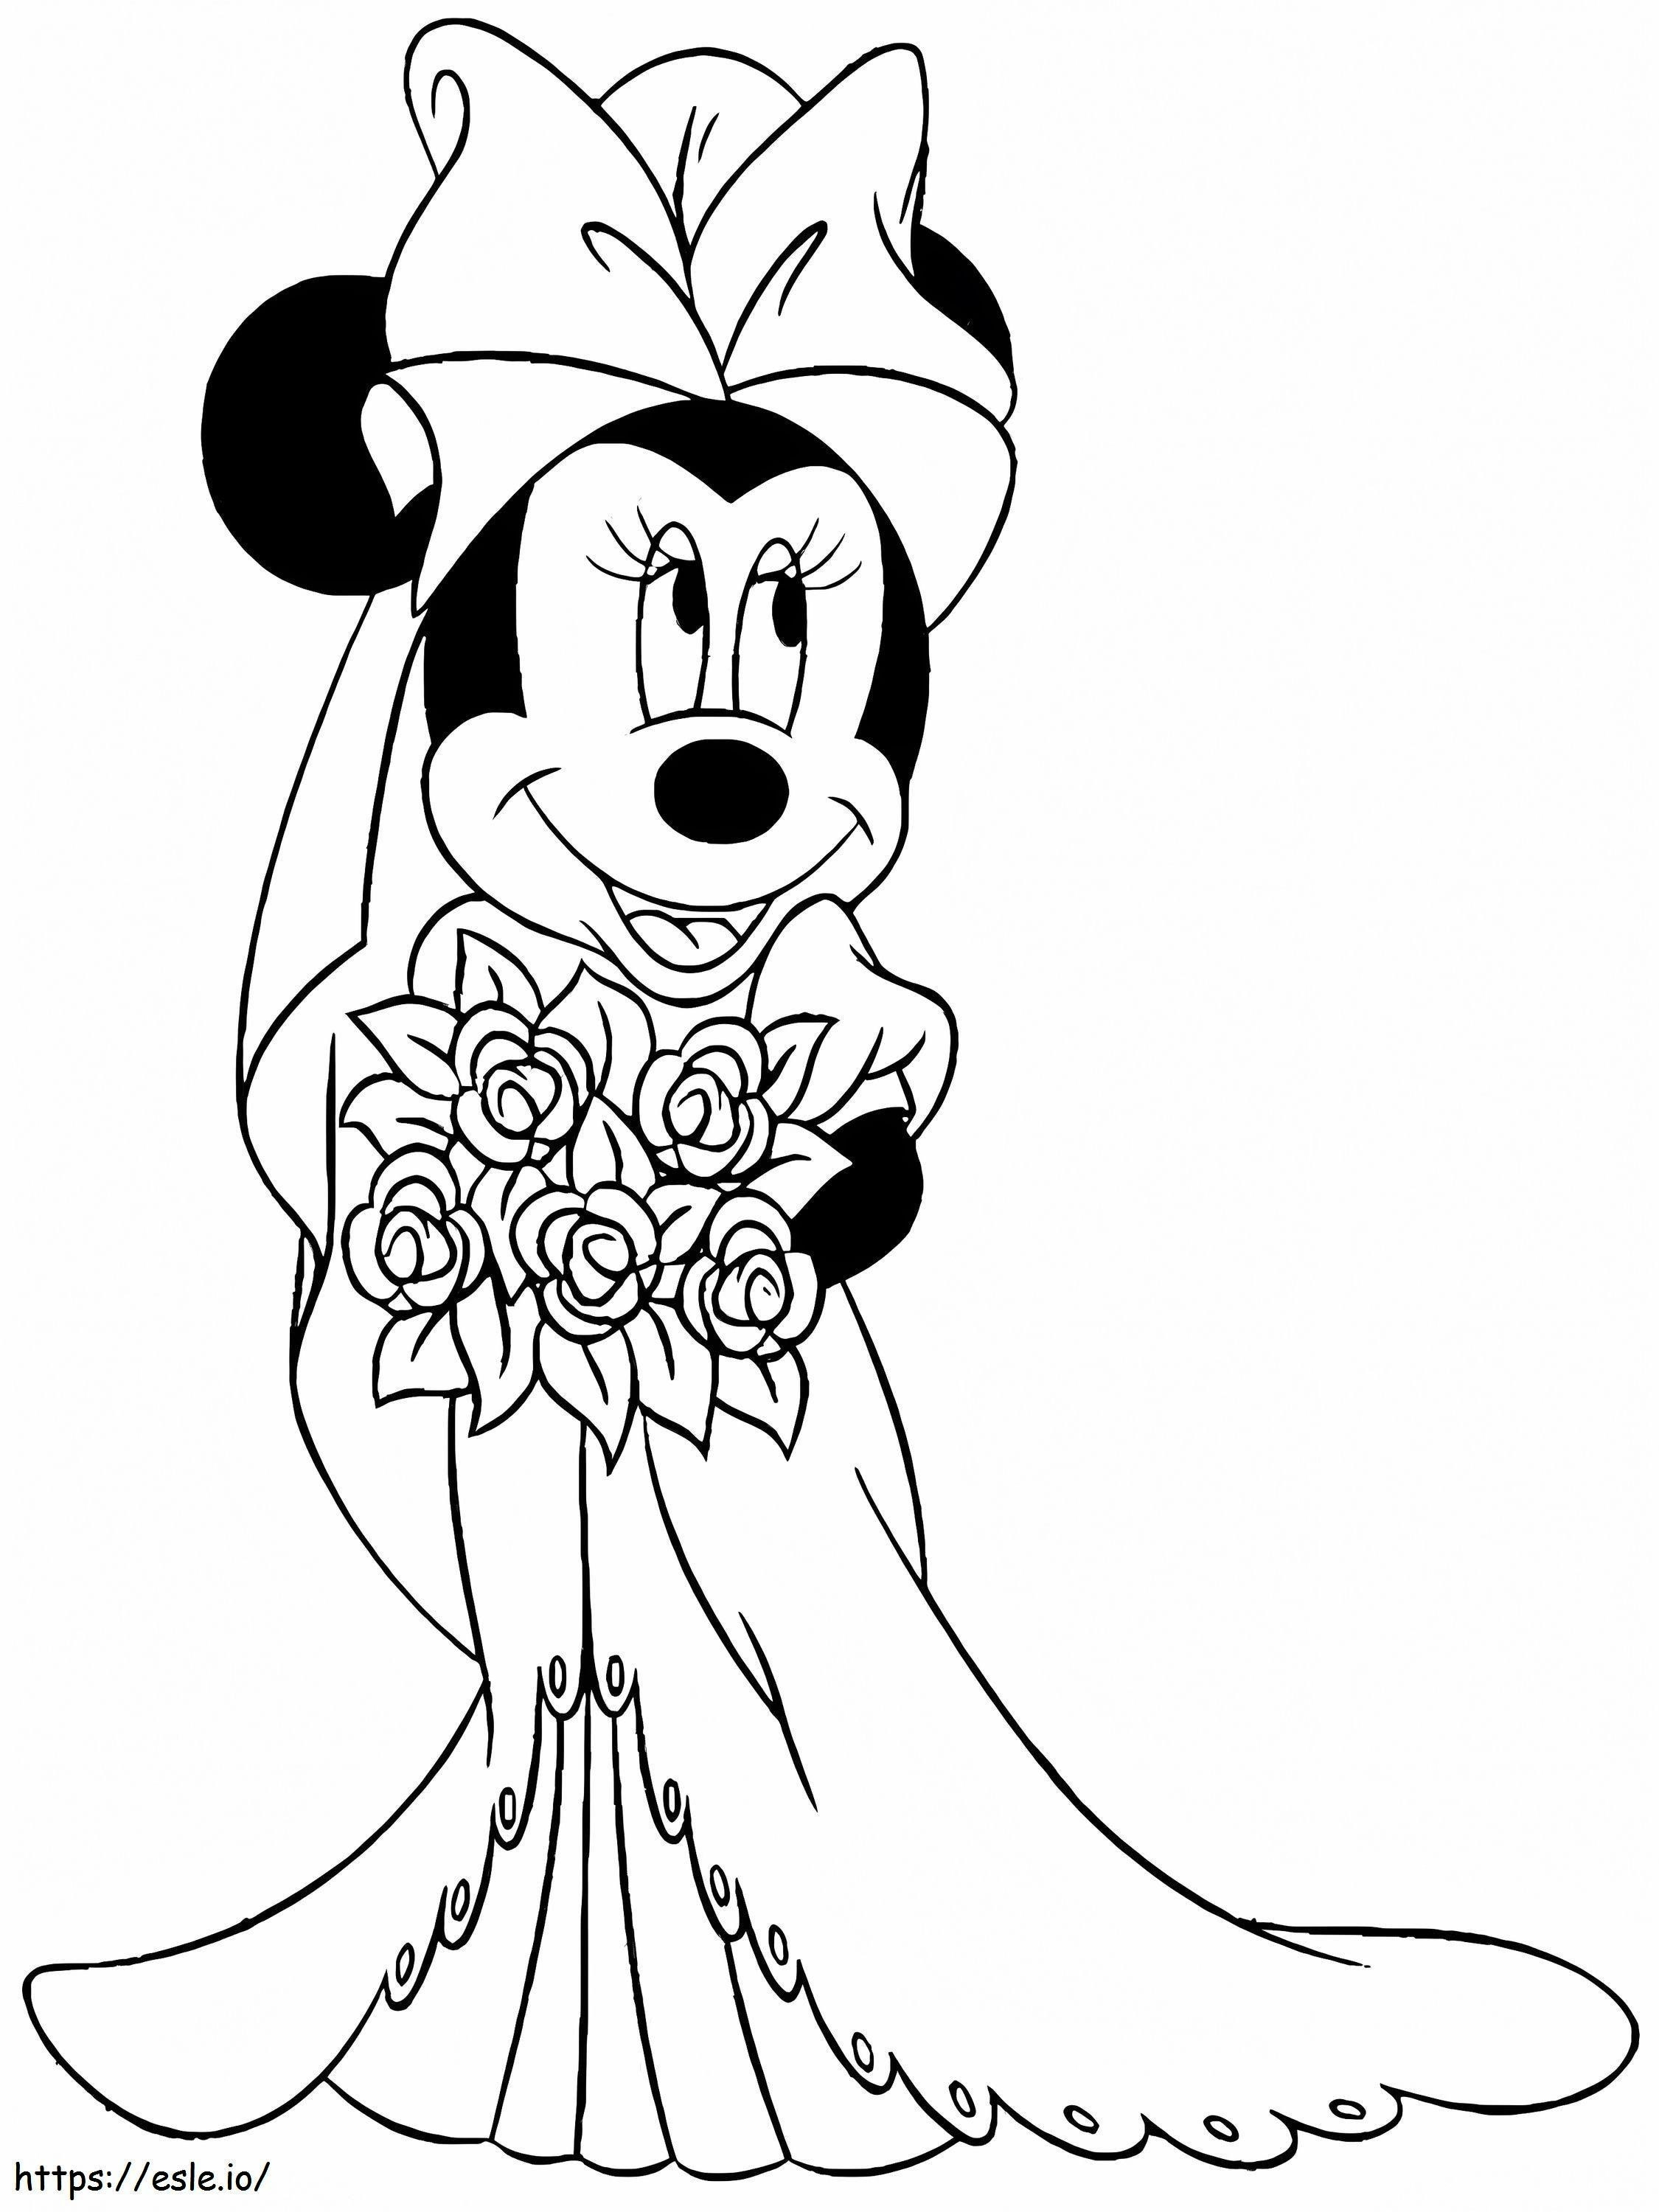 Bride'S Minnie Mouse coloring page